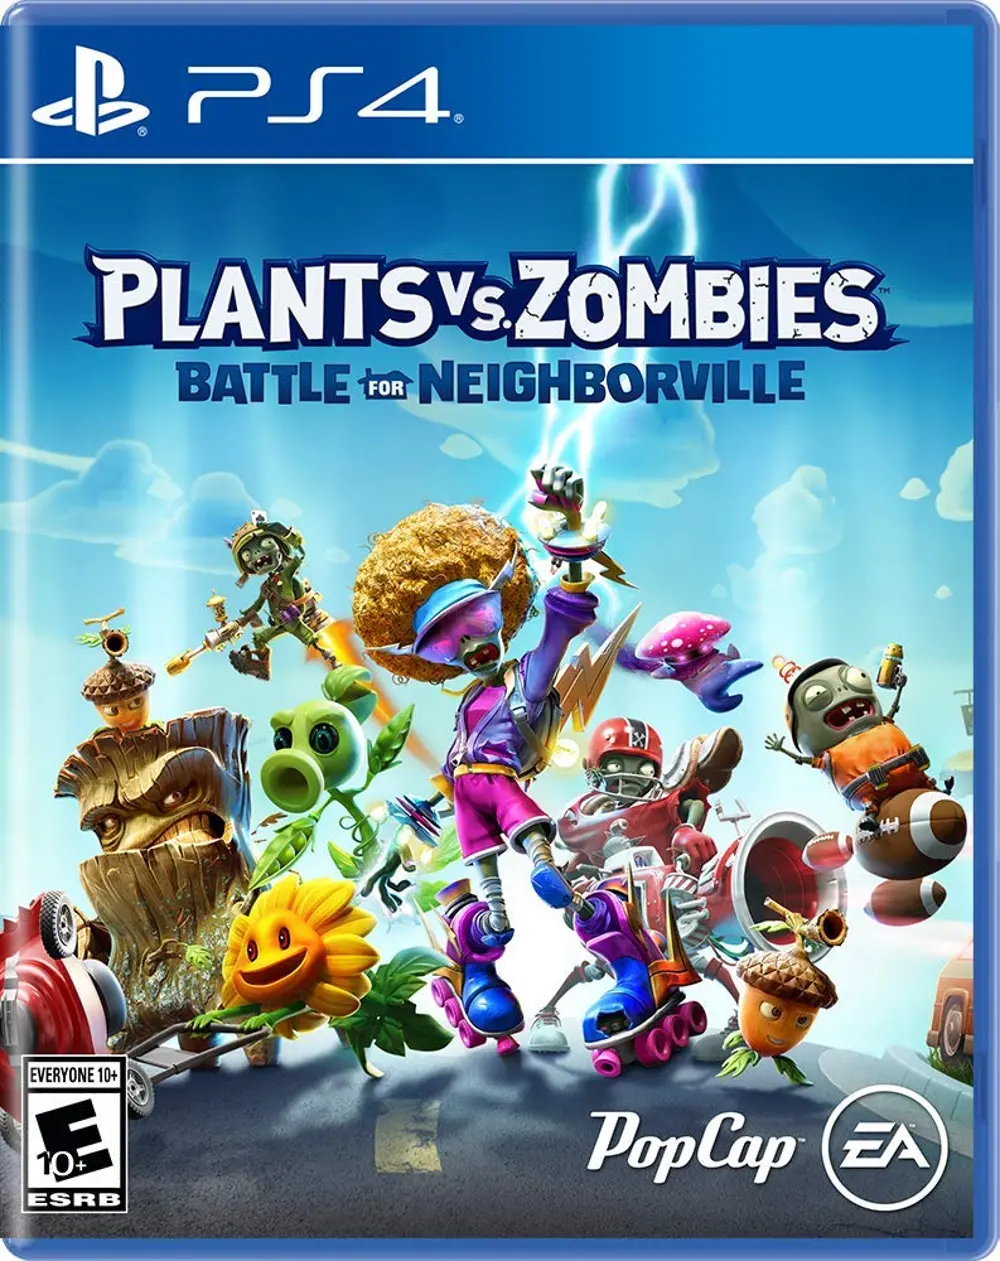 PS4/PLANTS_ZOMBIES Plants vs. Zombies: The Battle for Neighborville - PS4-1